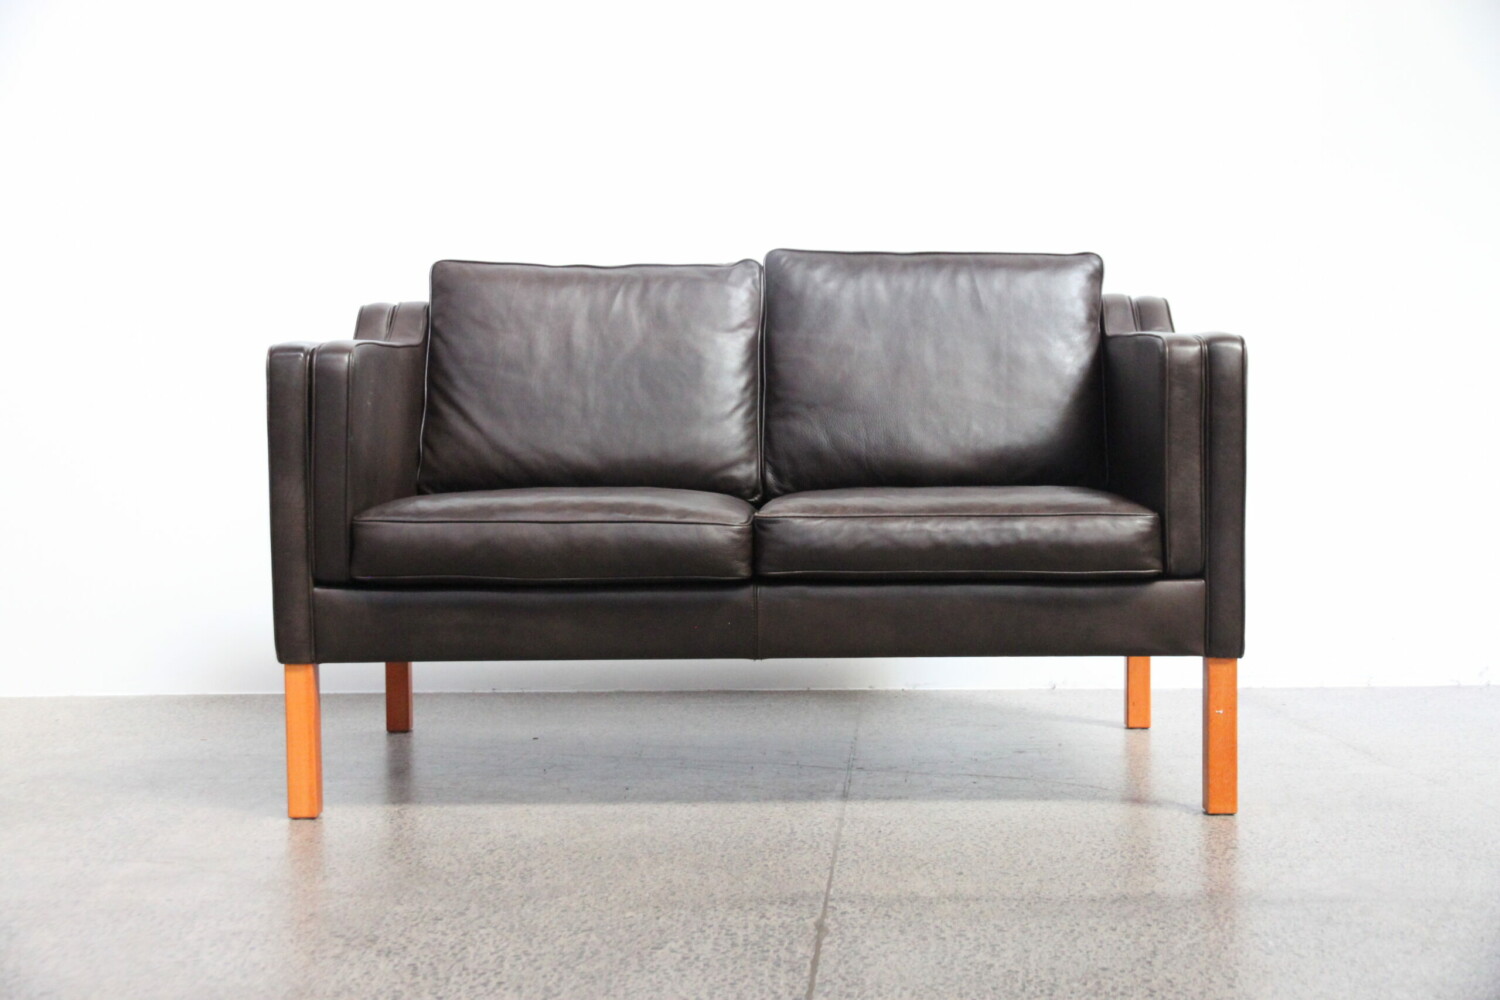 Pair of brown leather sofas